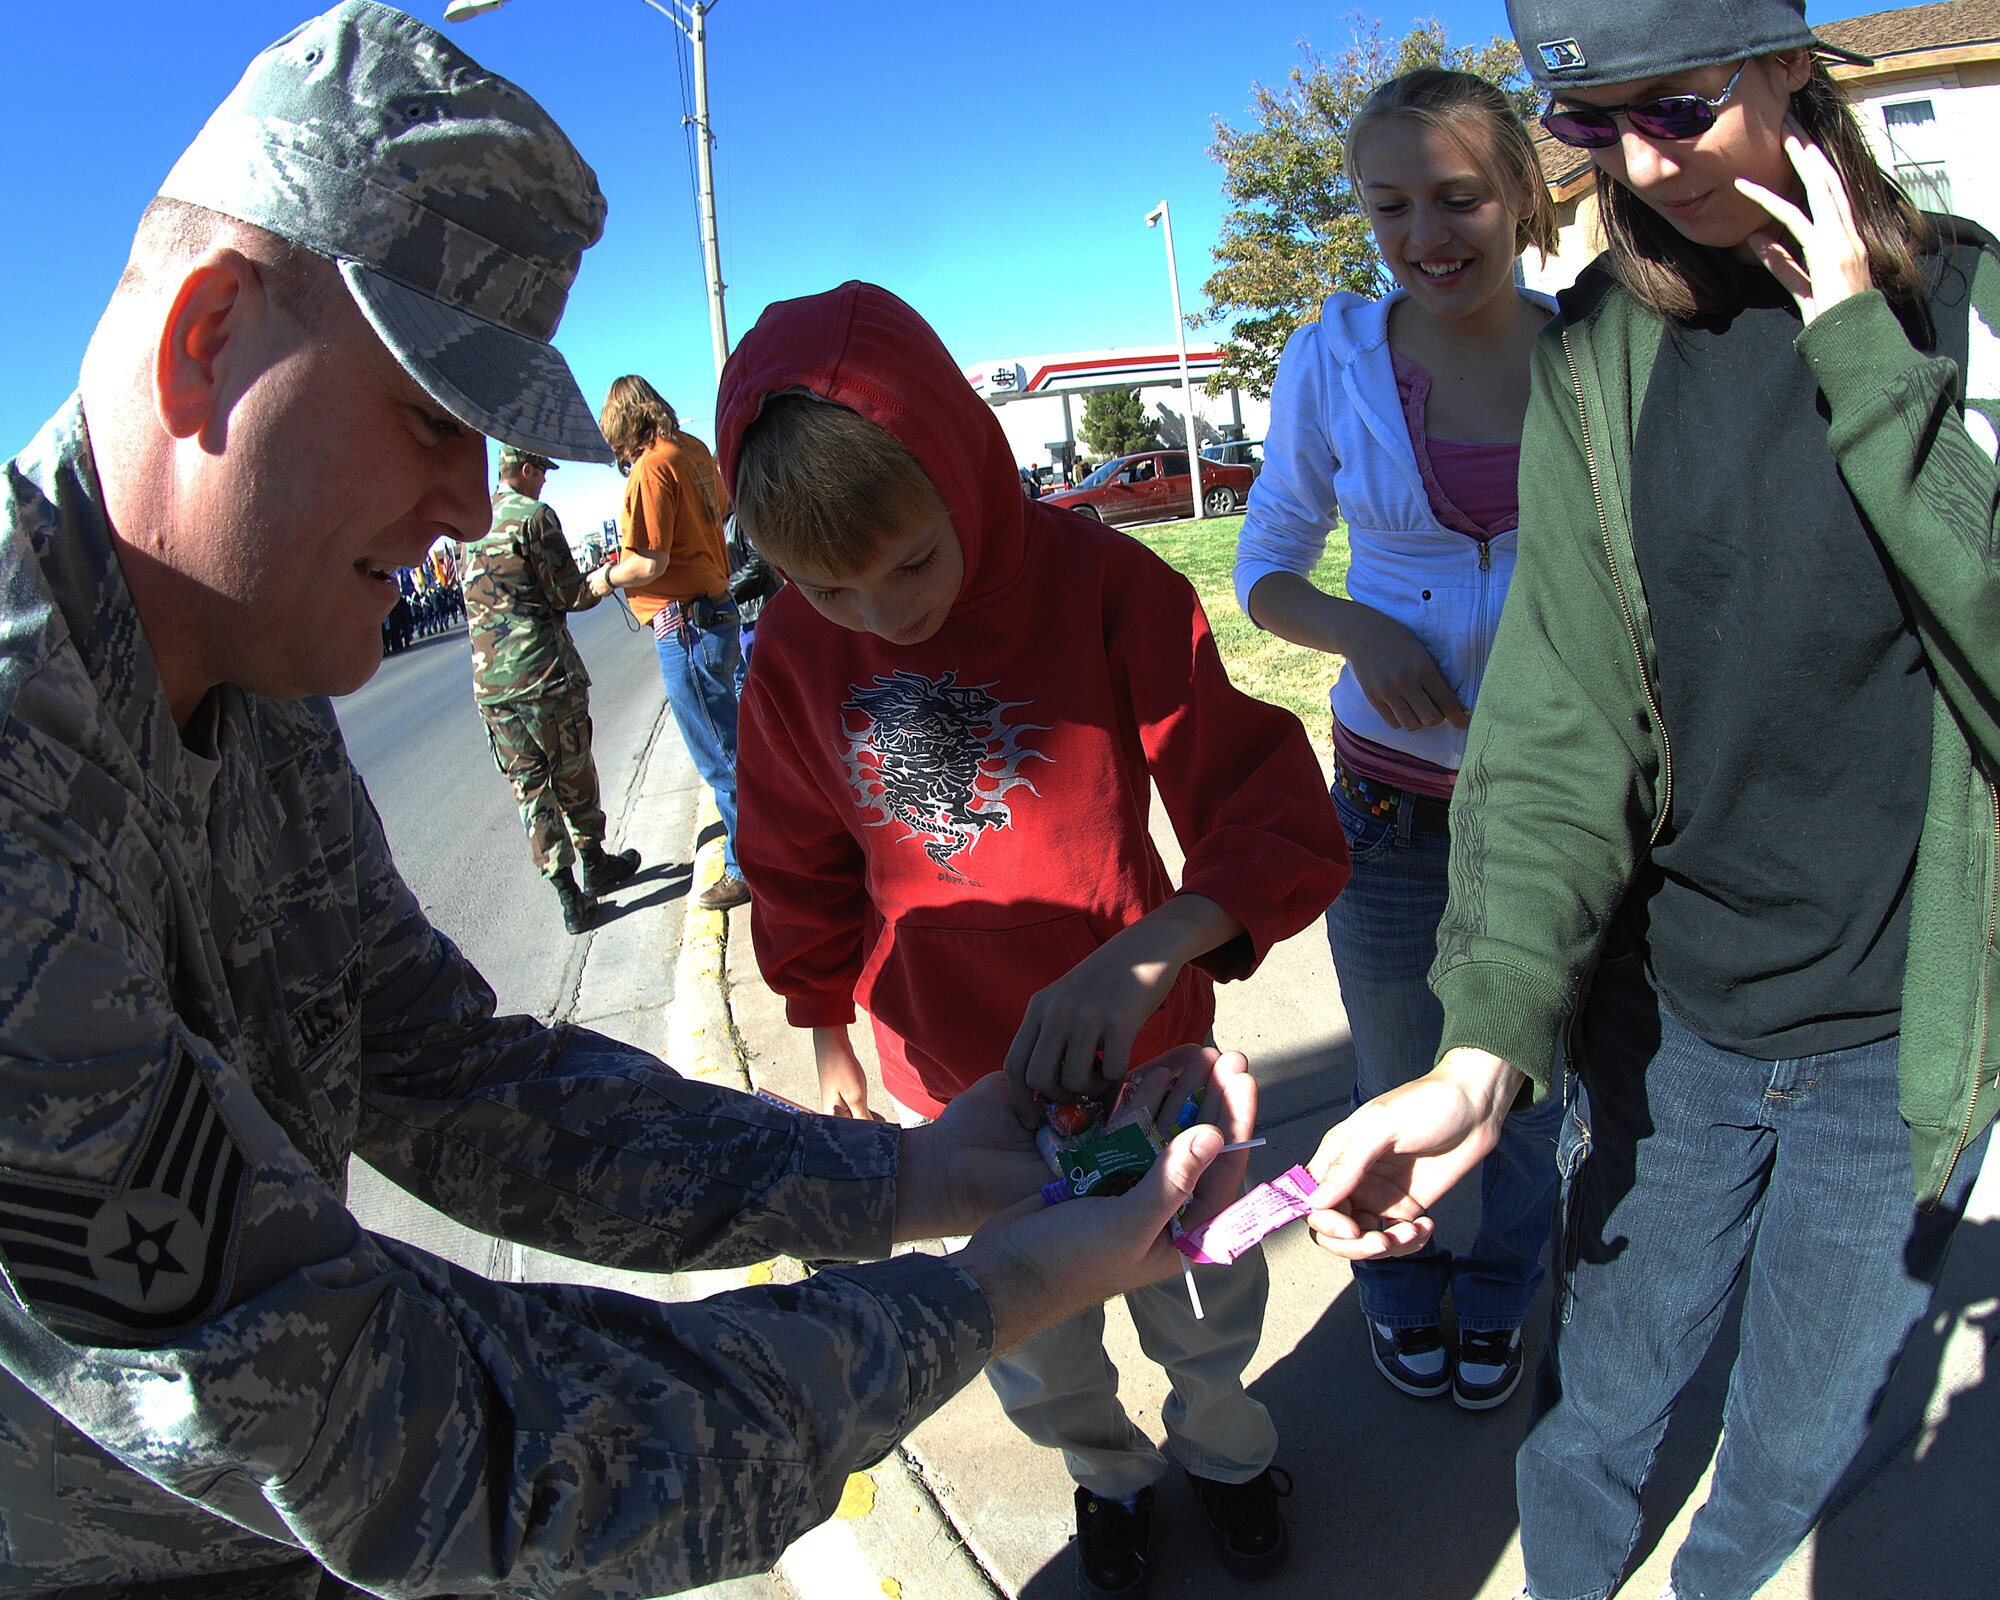 Amember of Holloman Air Force Base, N.M., passes out candy to children during the Veterans Day parade Nov. 8, in Alamogordo, N.M. The Veterans Day National Ceremony is Nov. 11 each year at Arlington National Cemetery.

(U.S. Air Force photo/ Senior Airman Anthony Nelson)
